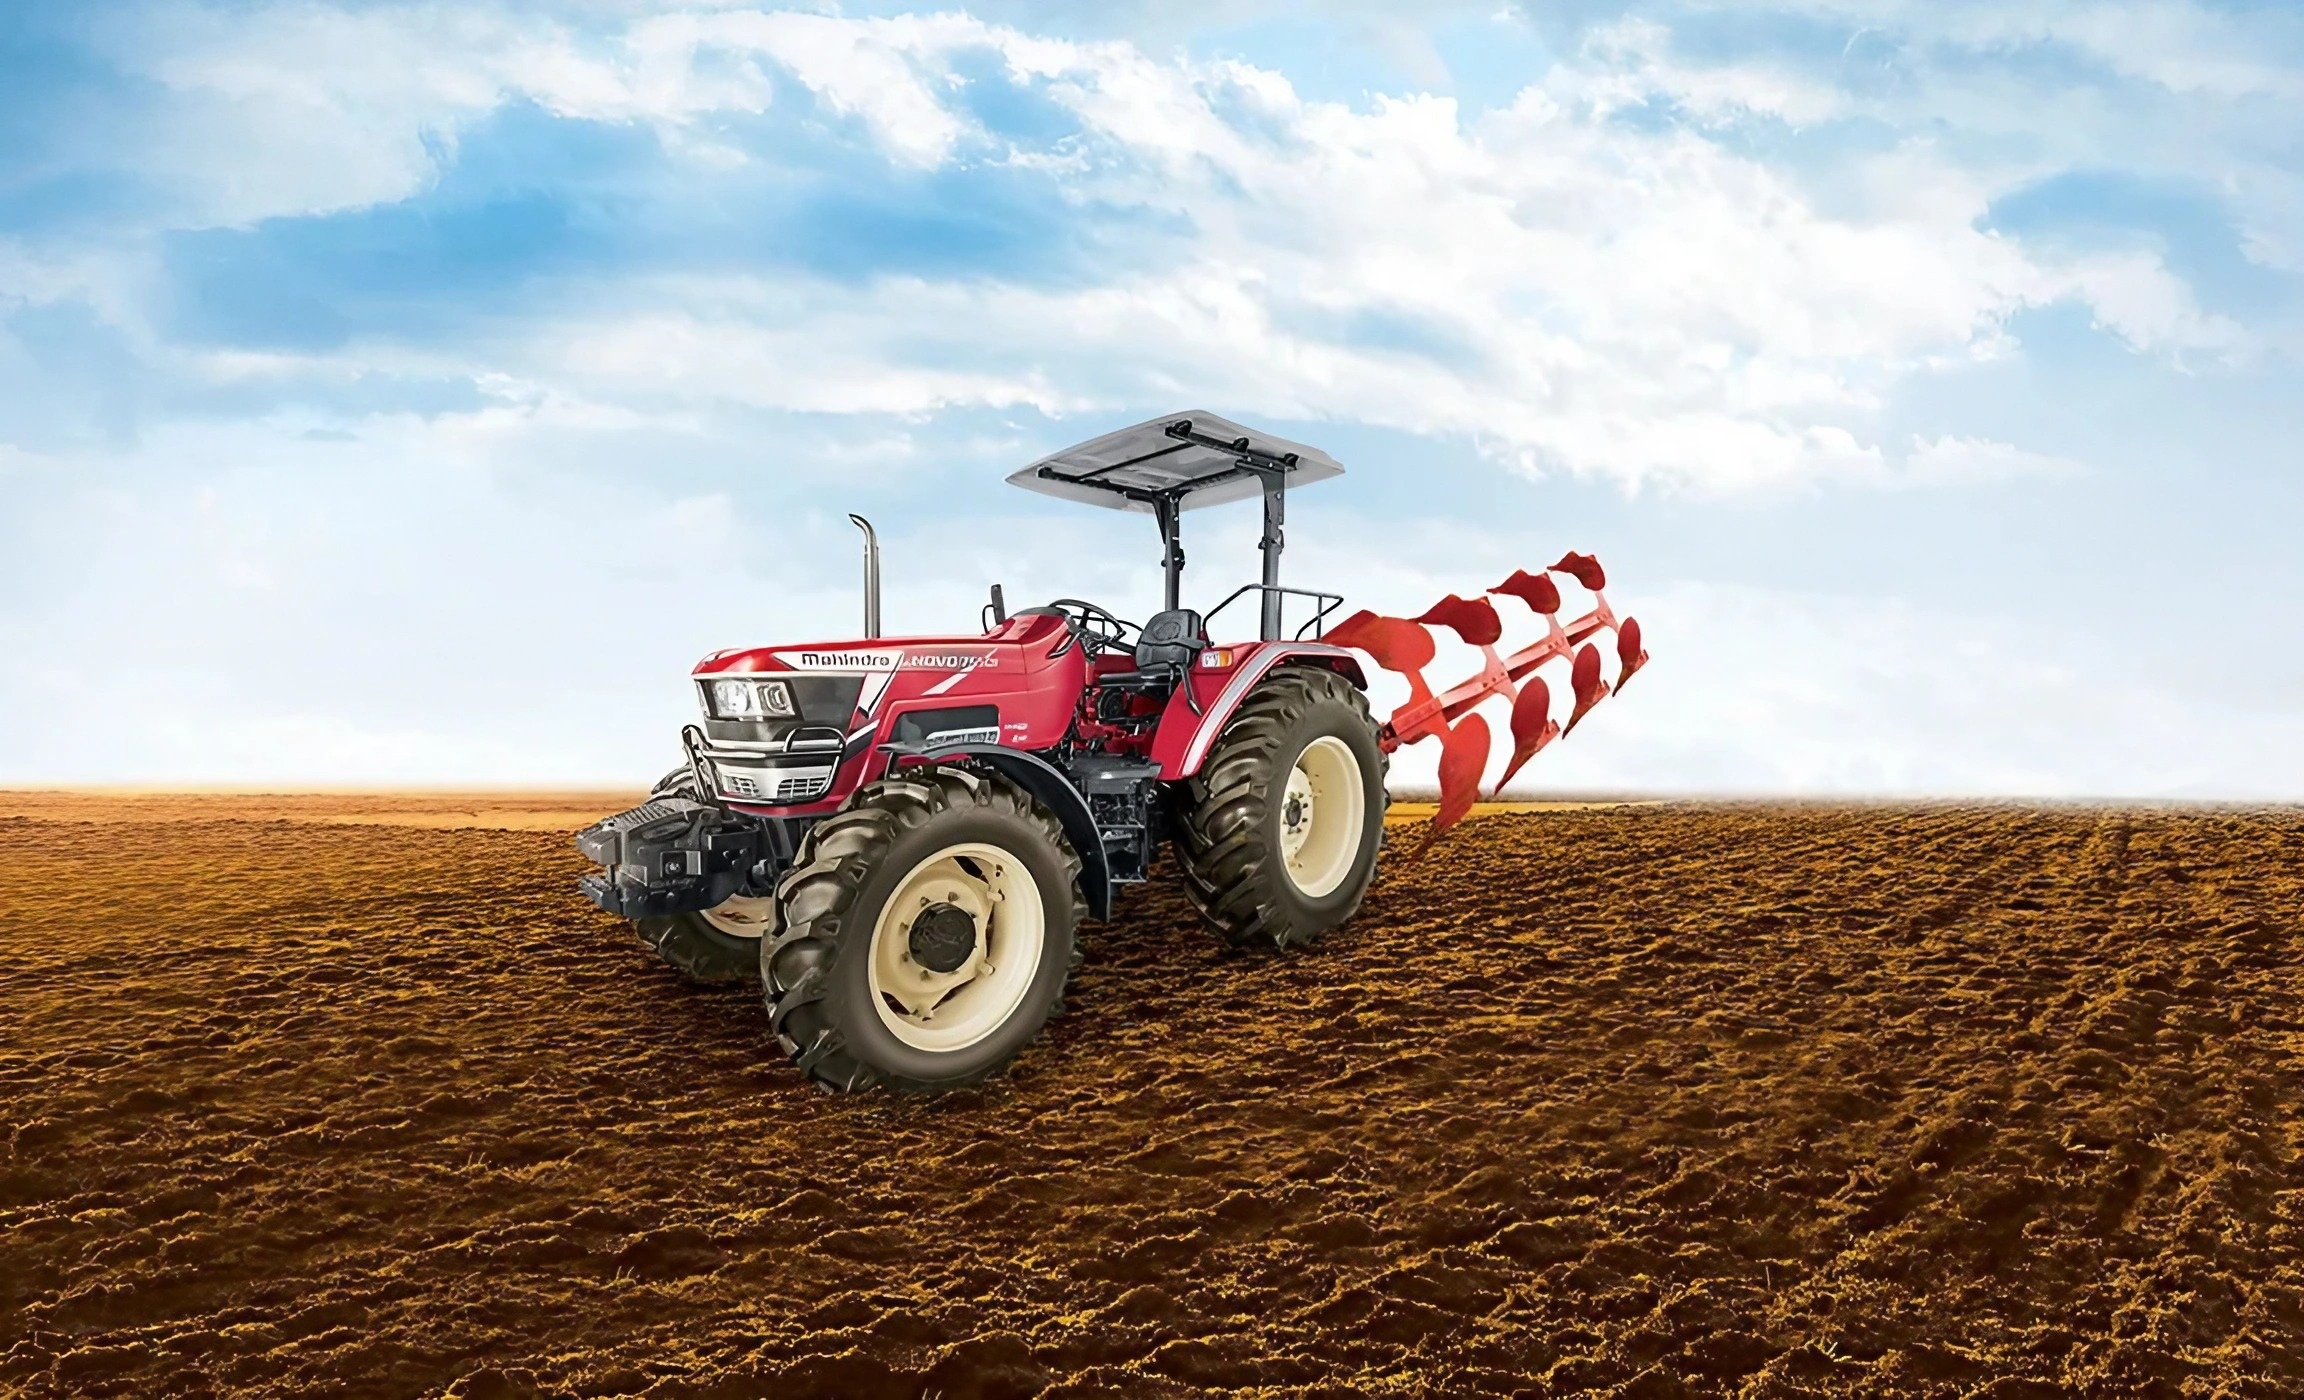 Mahindra Tractor - Red Tractor